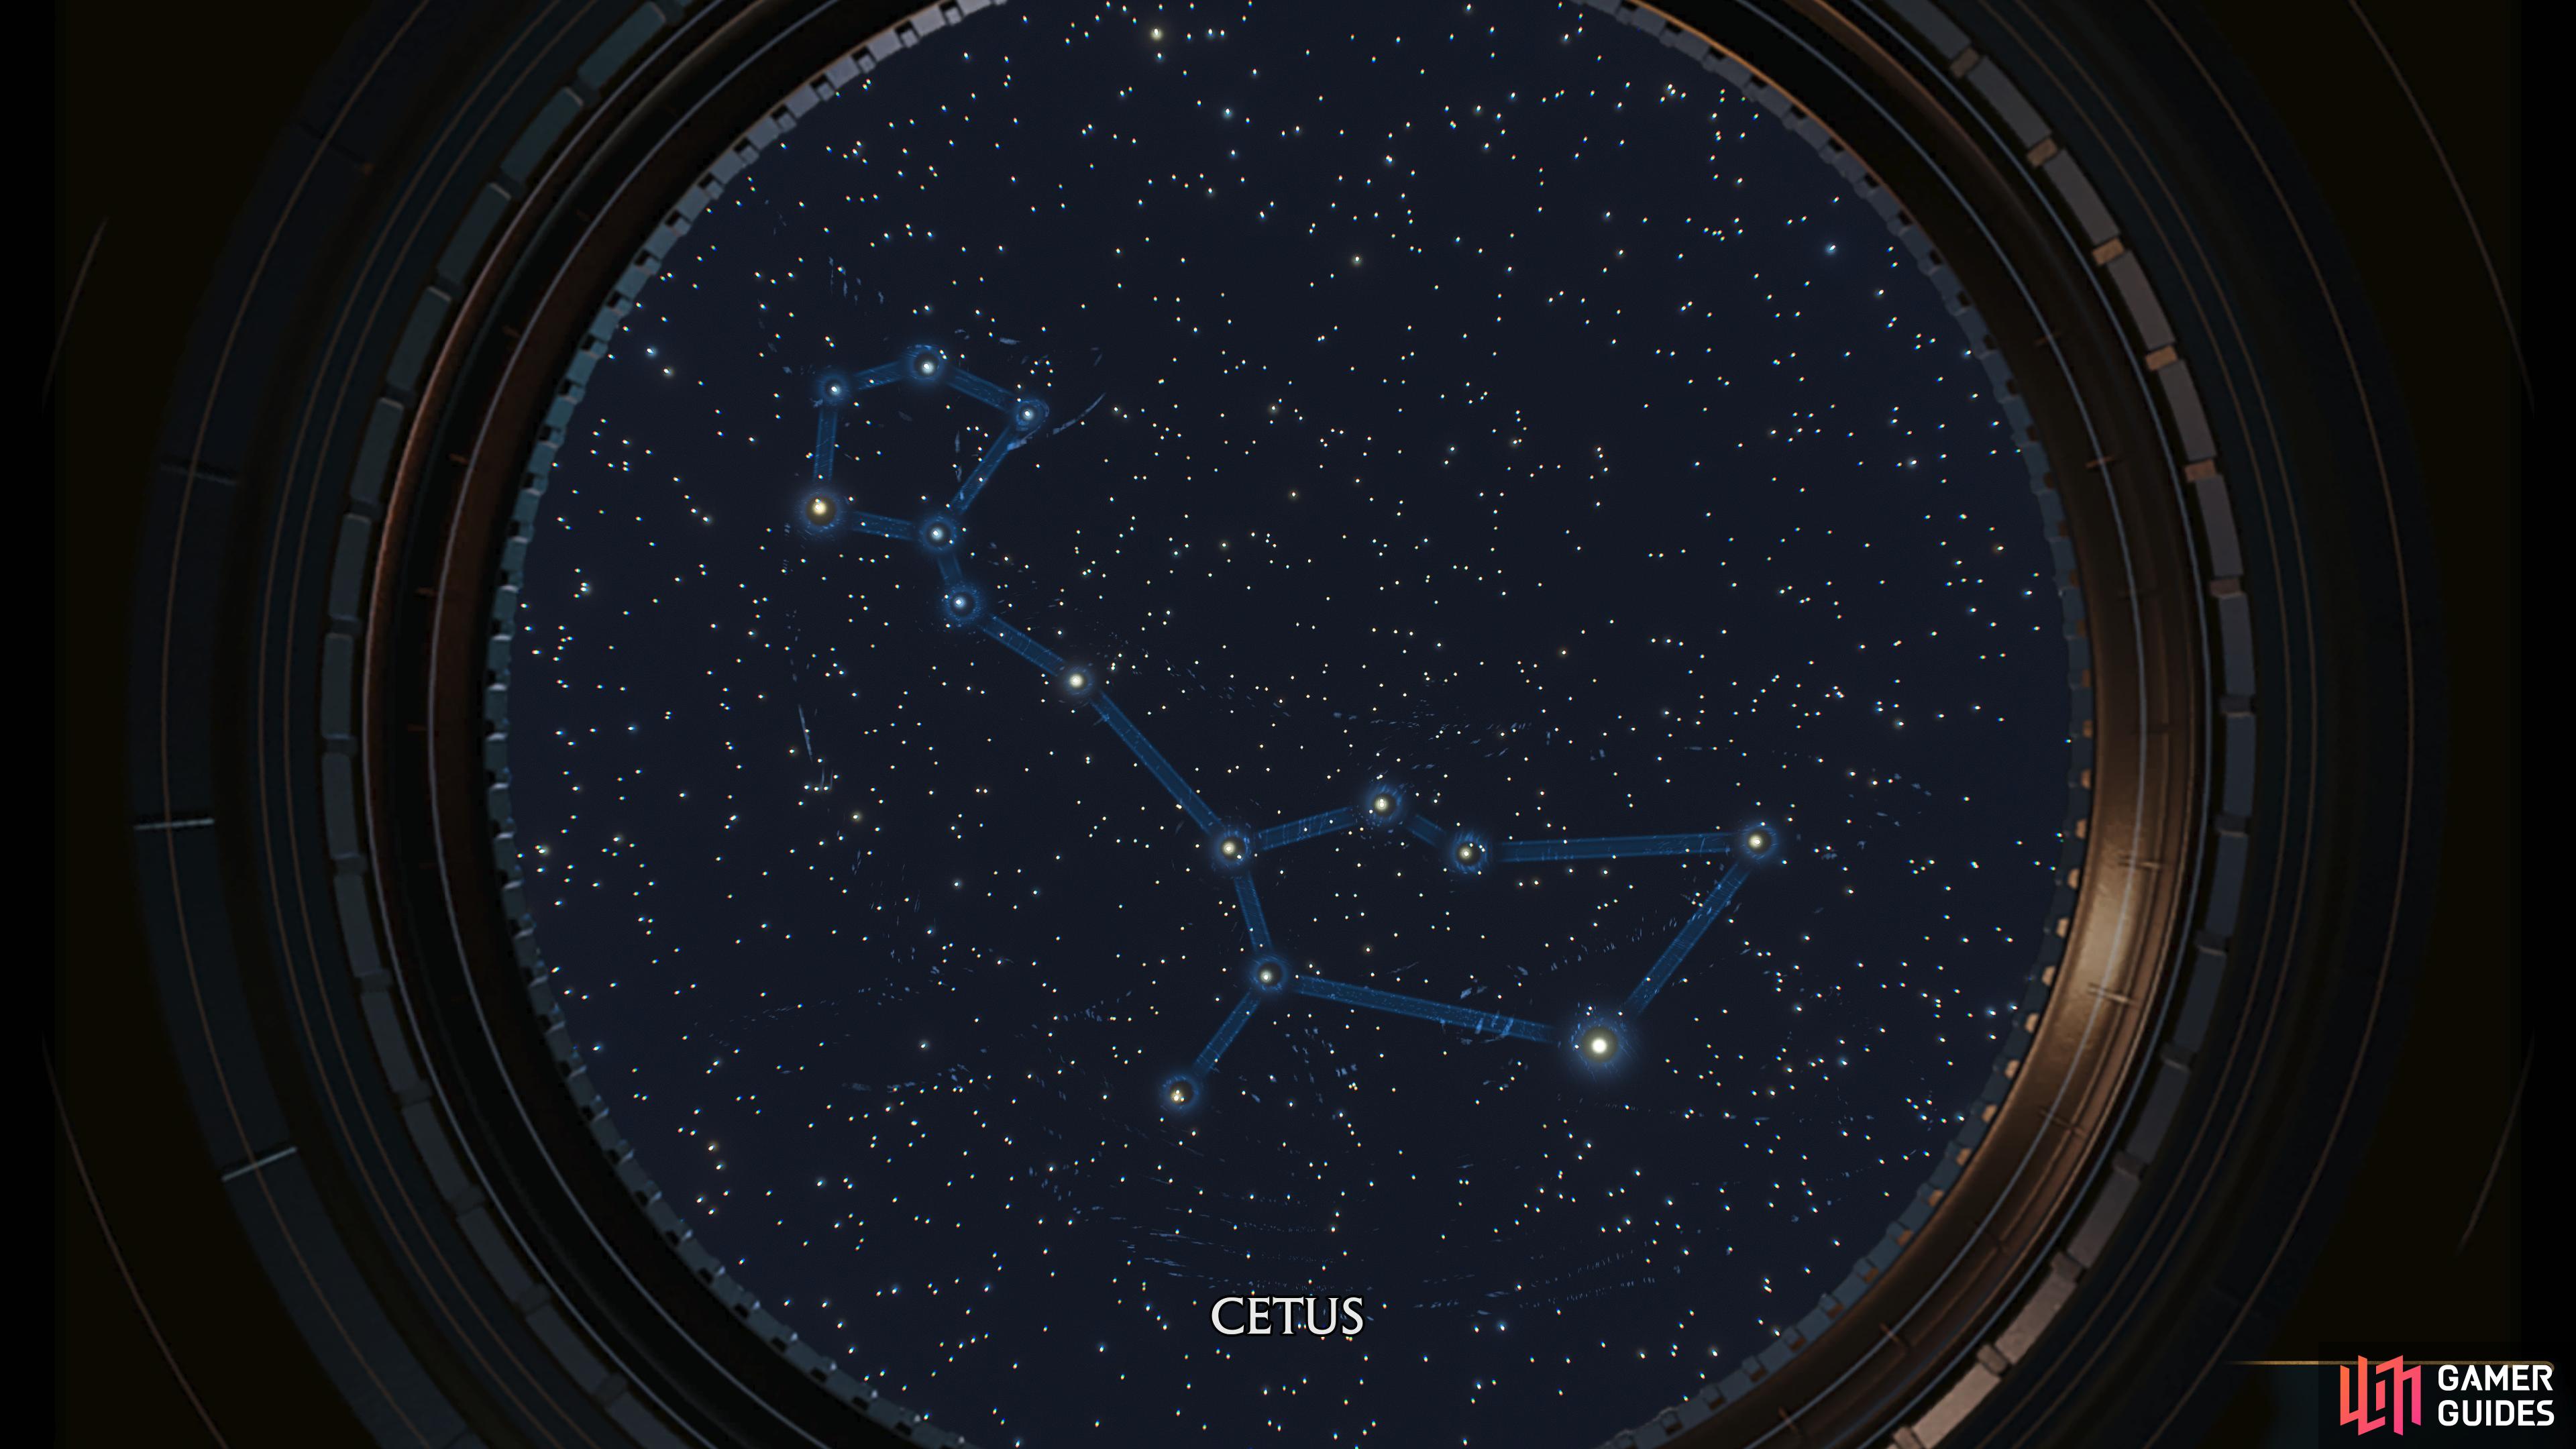 this is the sign for Cetus.